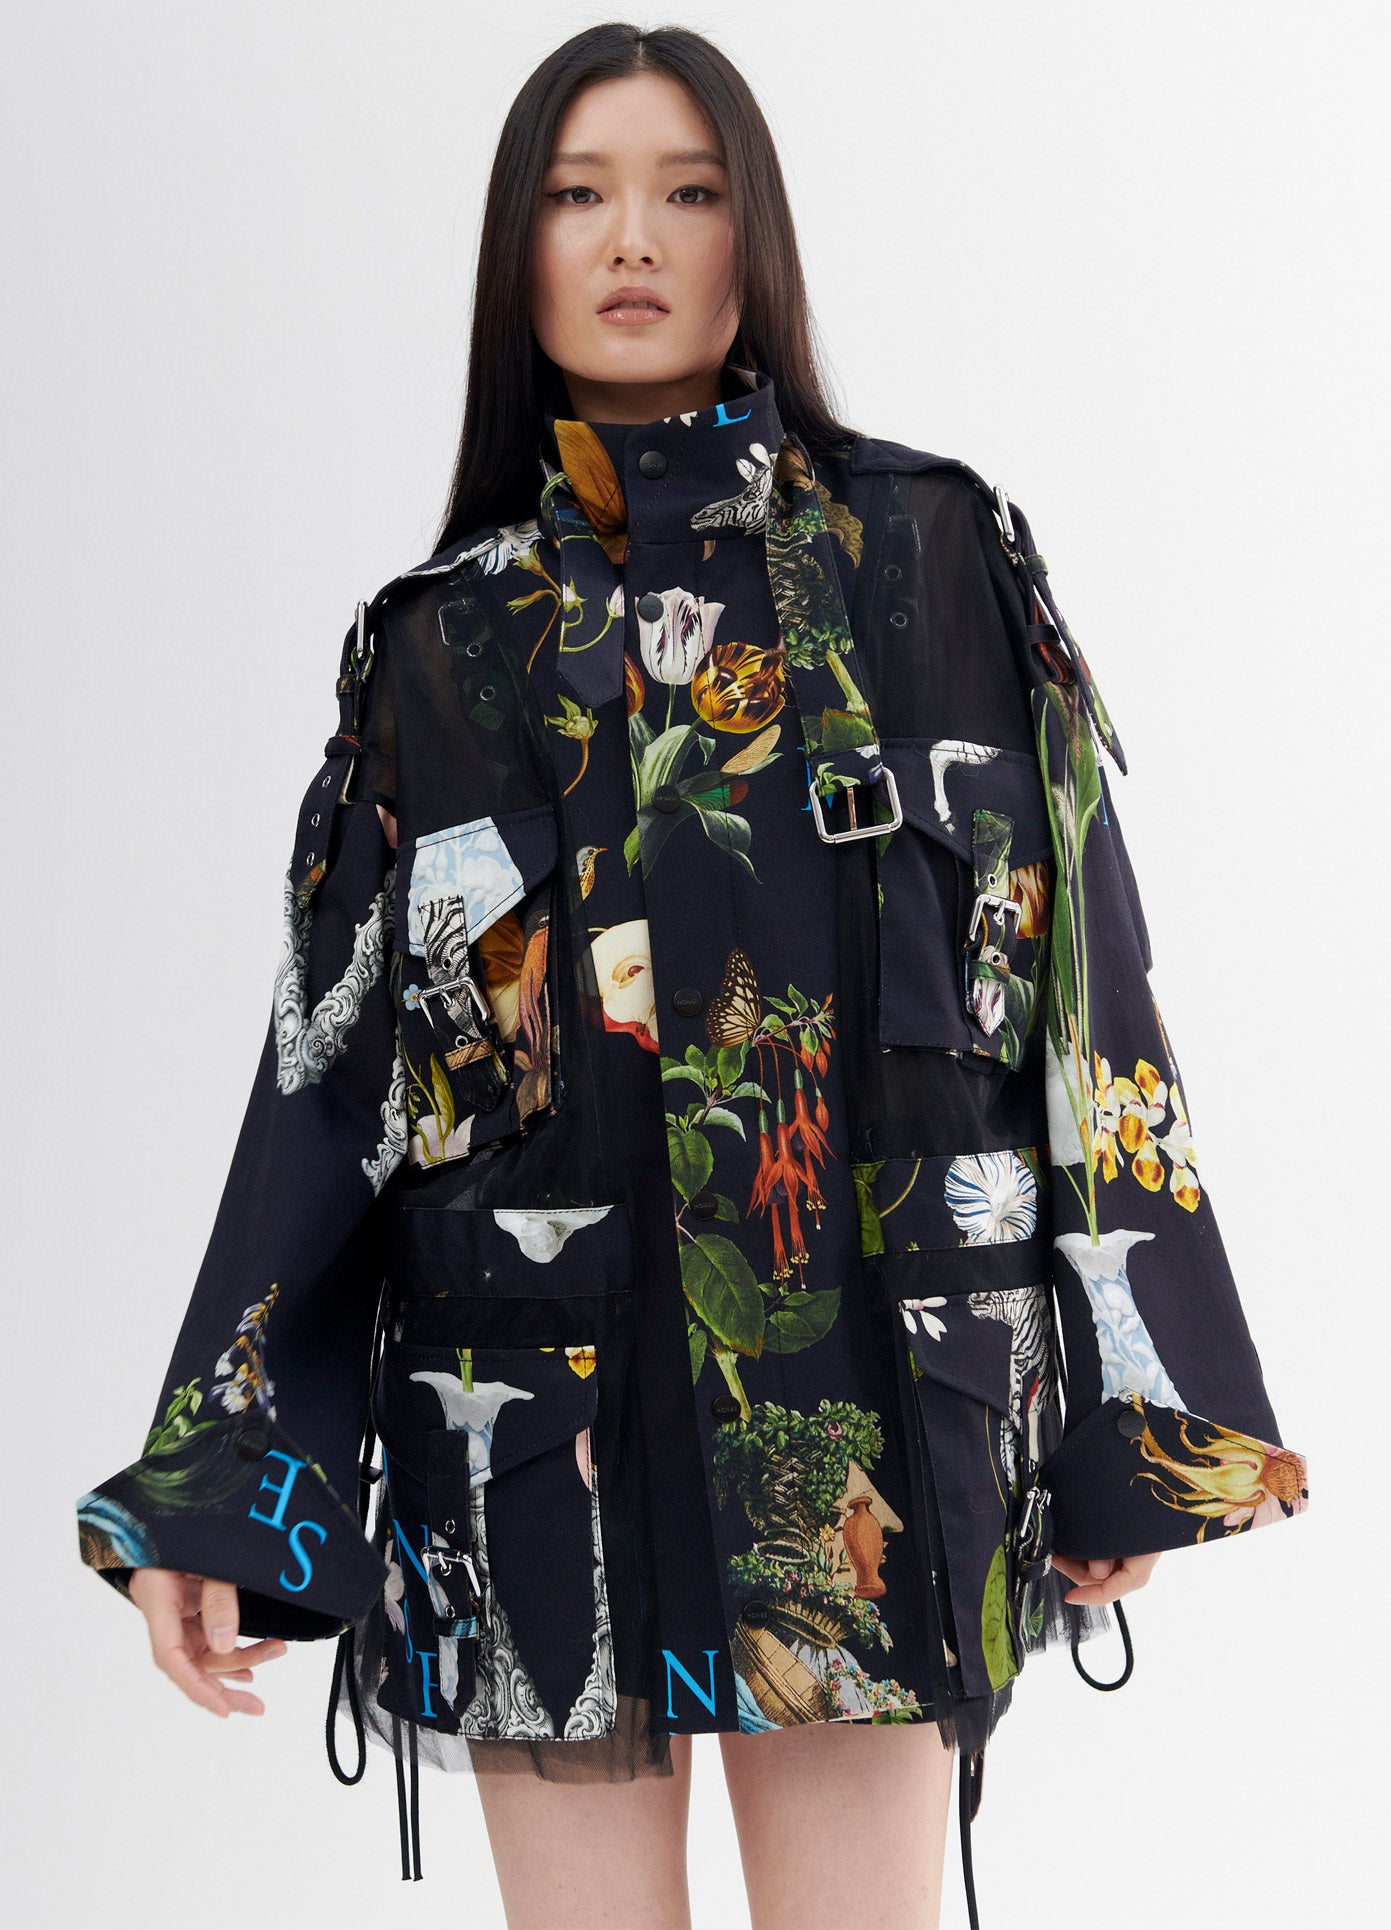 MONSE Print Cargo Tulle Jacket in Black Print on Model Front Detail View